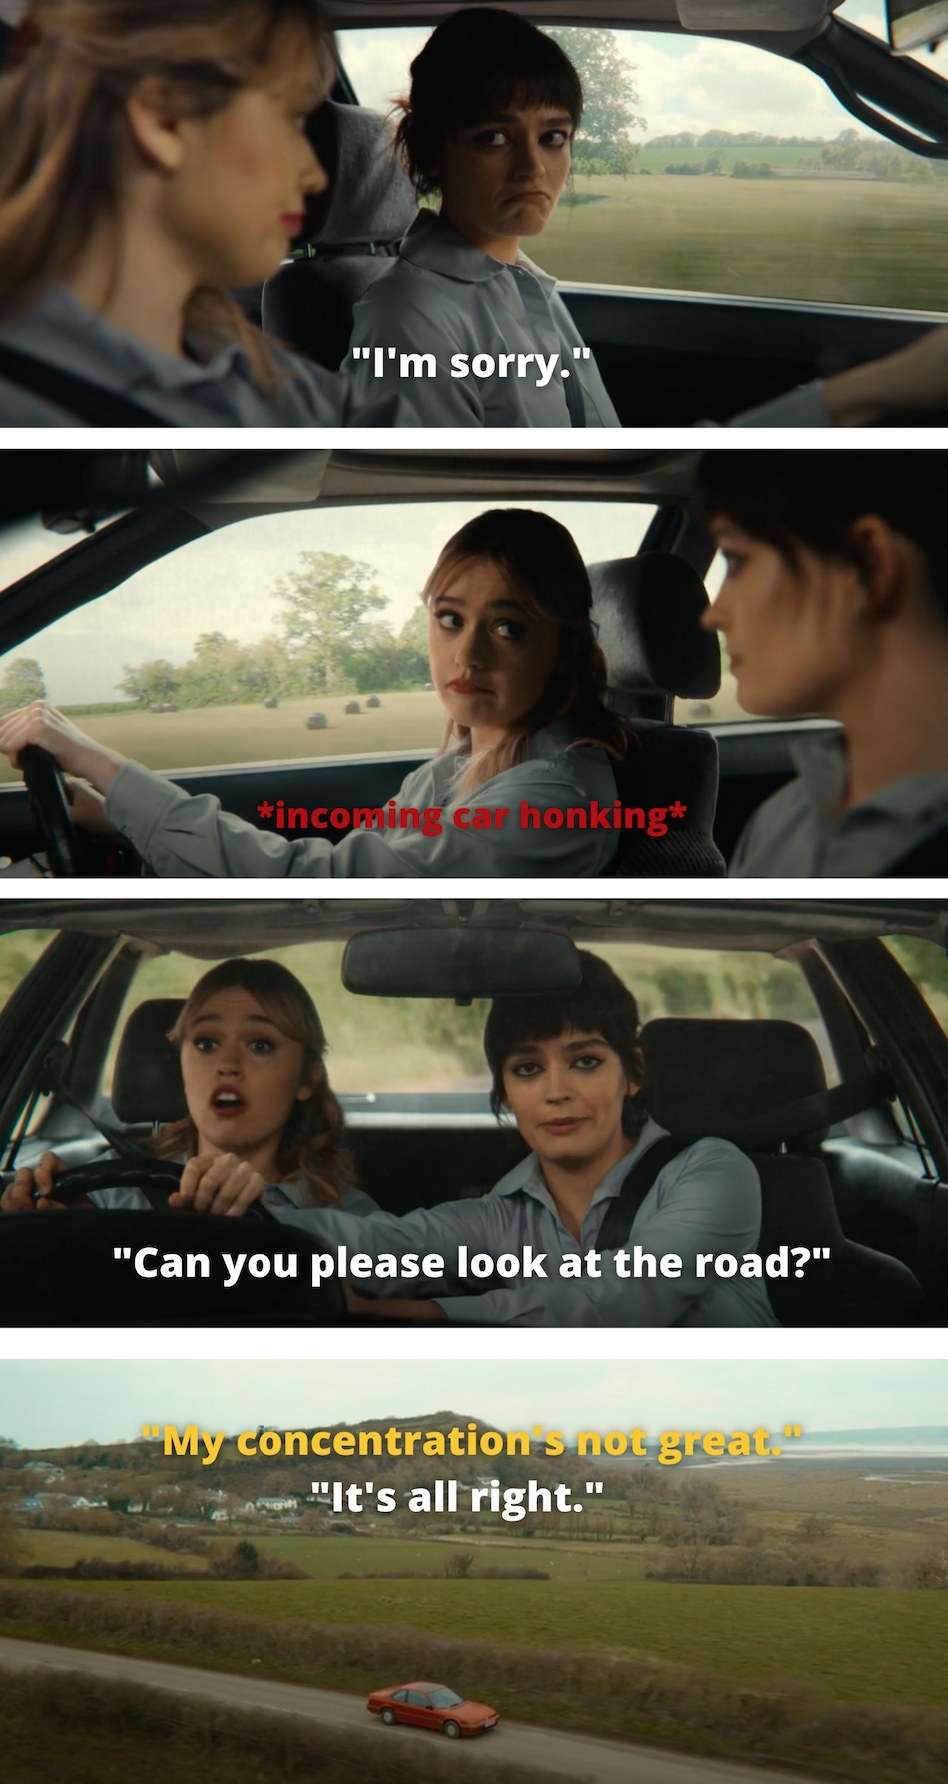 &quot;can you please look at the road&quot; scene